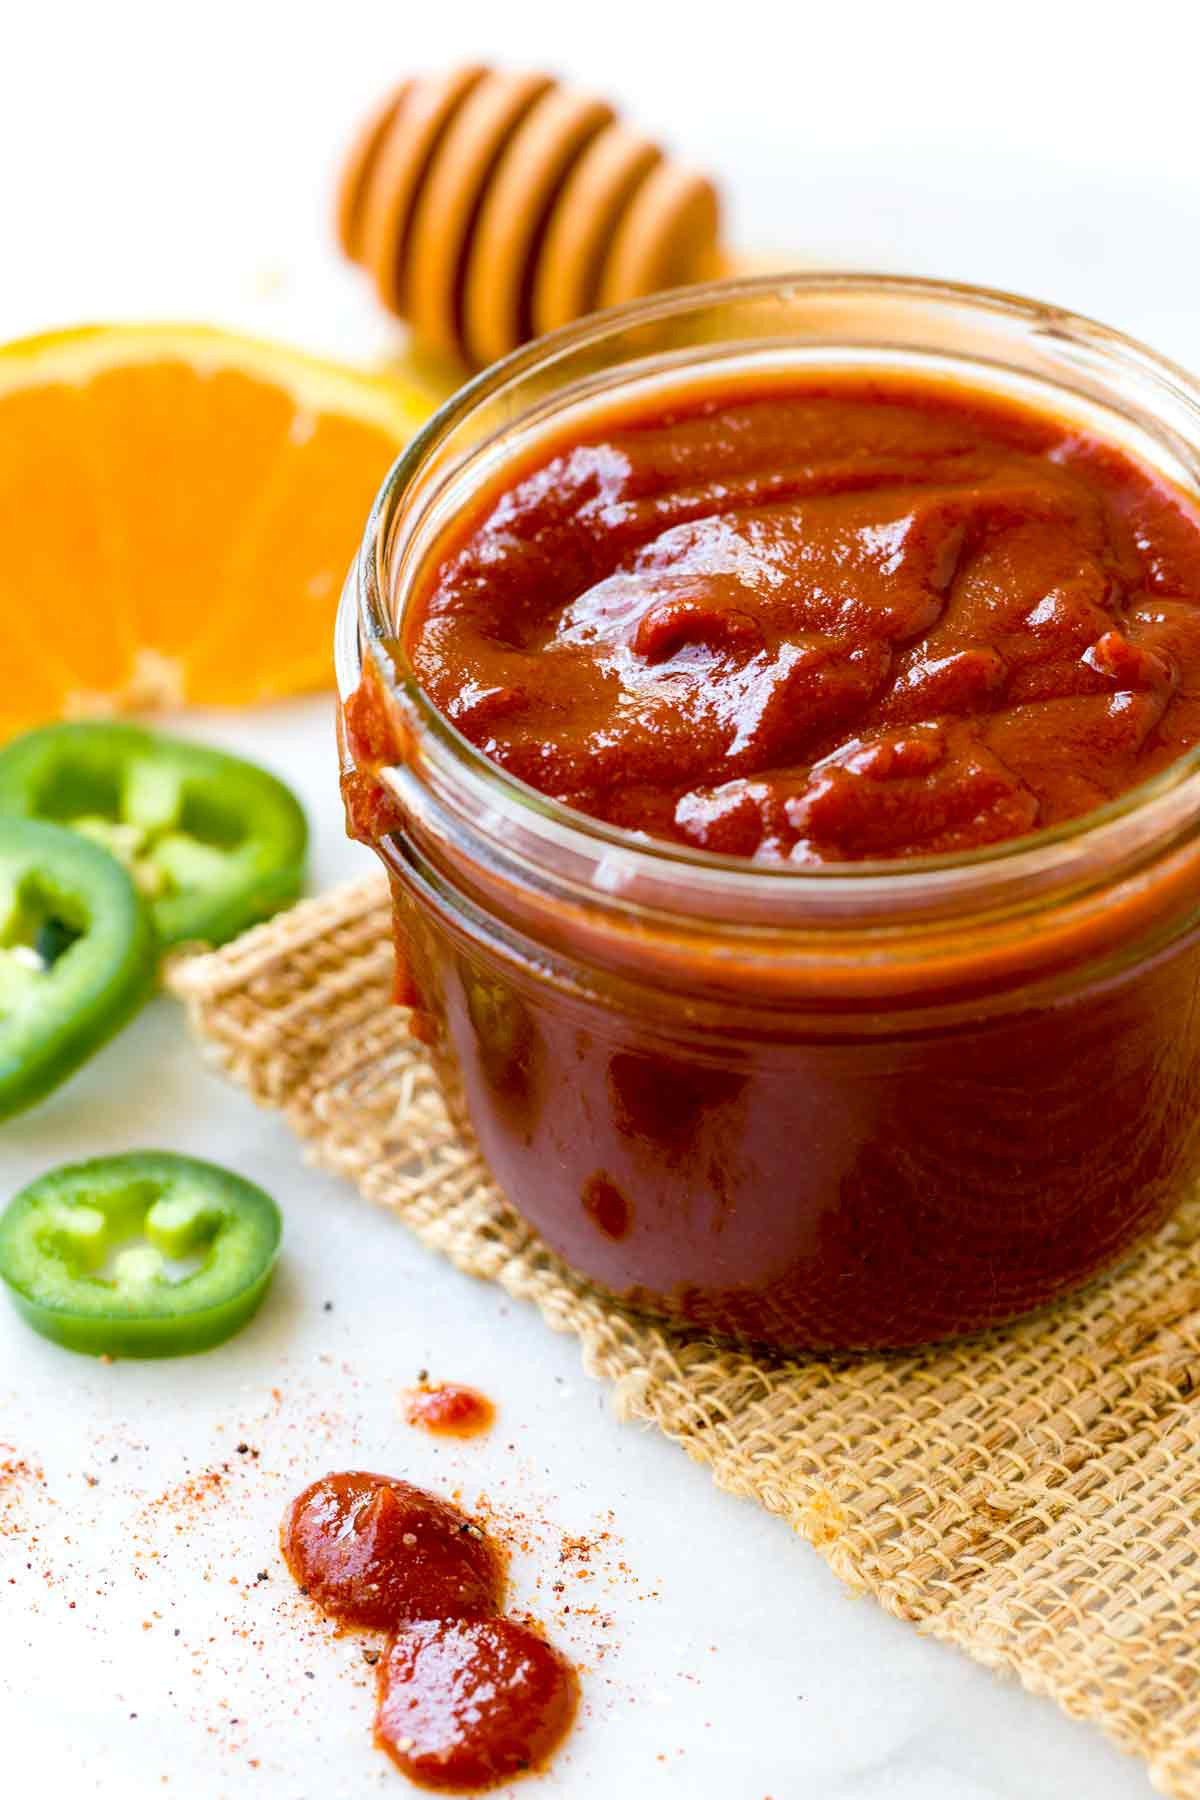 Homemade Spicy Bbq Sauce
 Homemade Barbecue Sauce Recipe